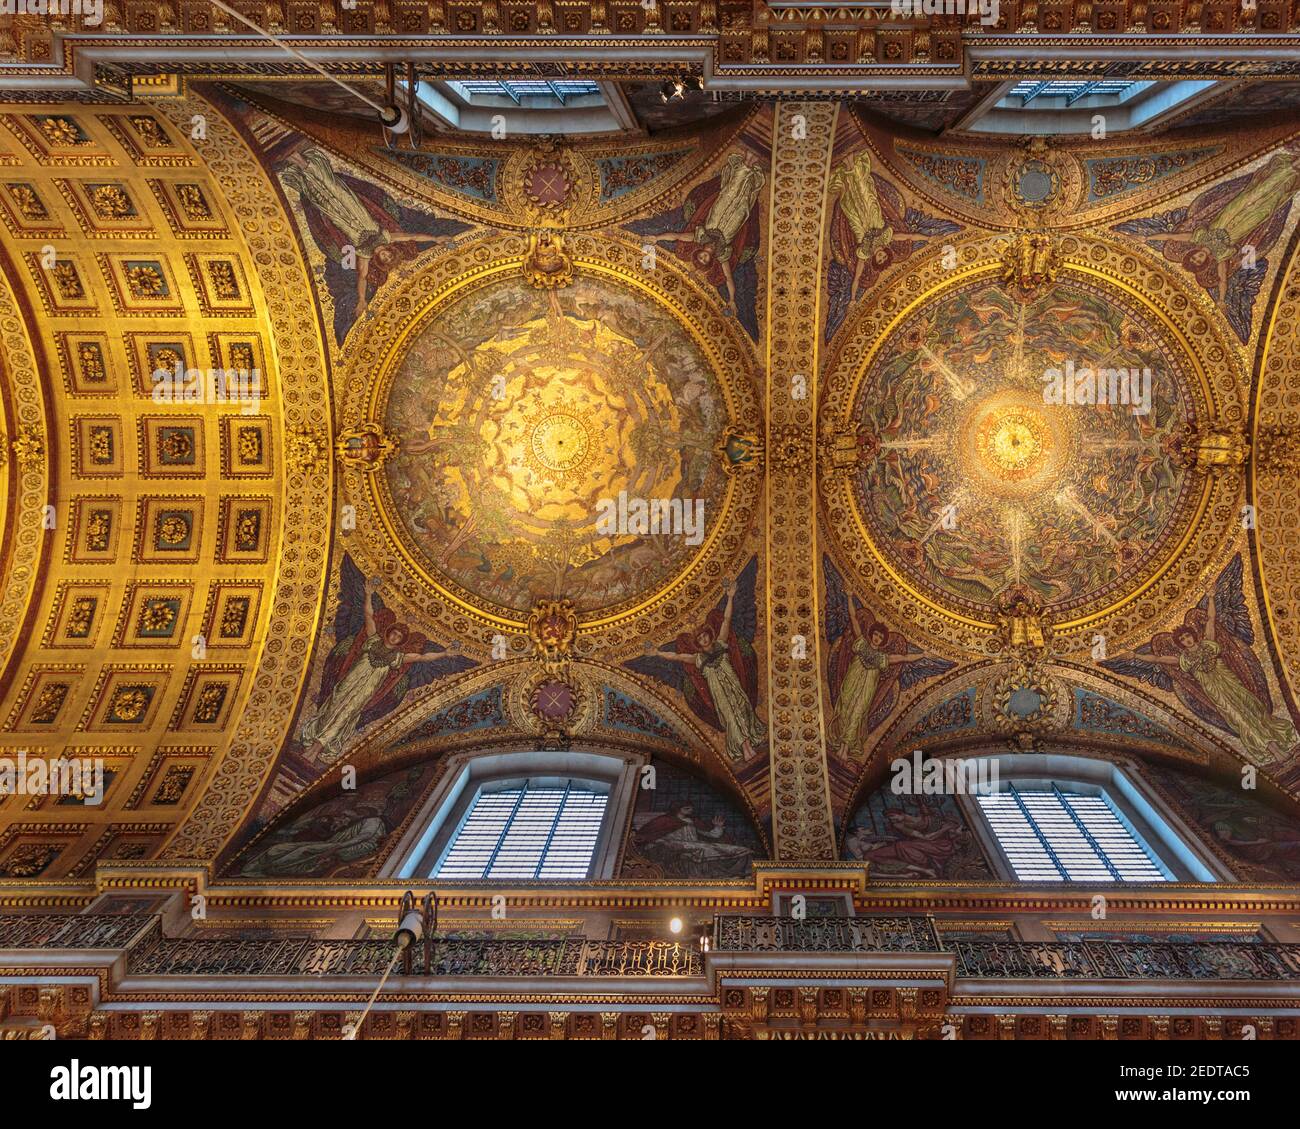 The Quire Ceiling, St Paul's Cathedral interior, view up to the murals, carvings and gilded decorations, London, England, UK Stock Photo